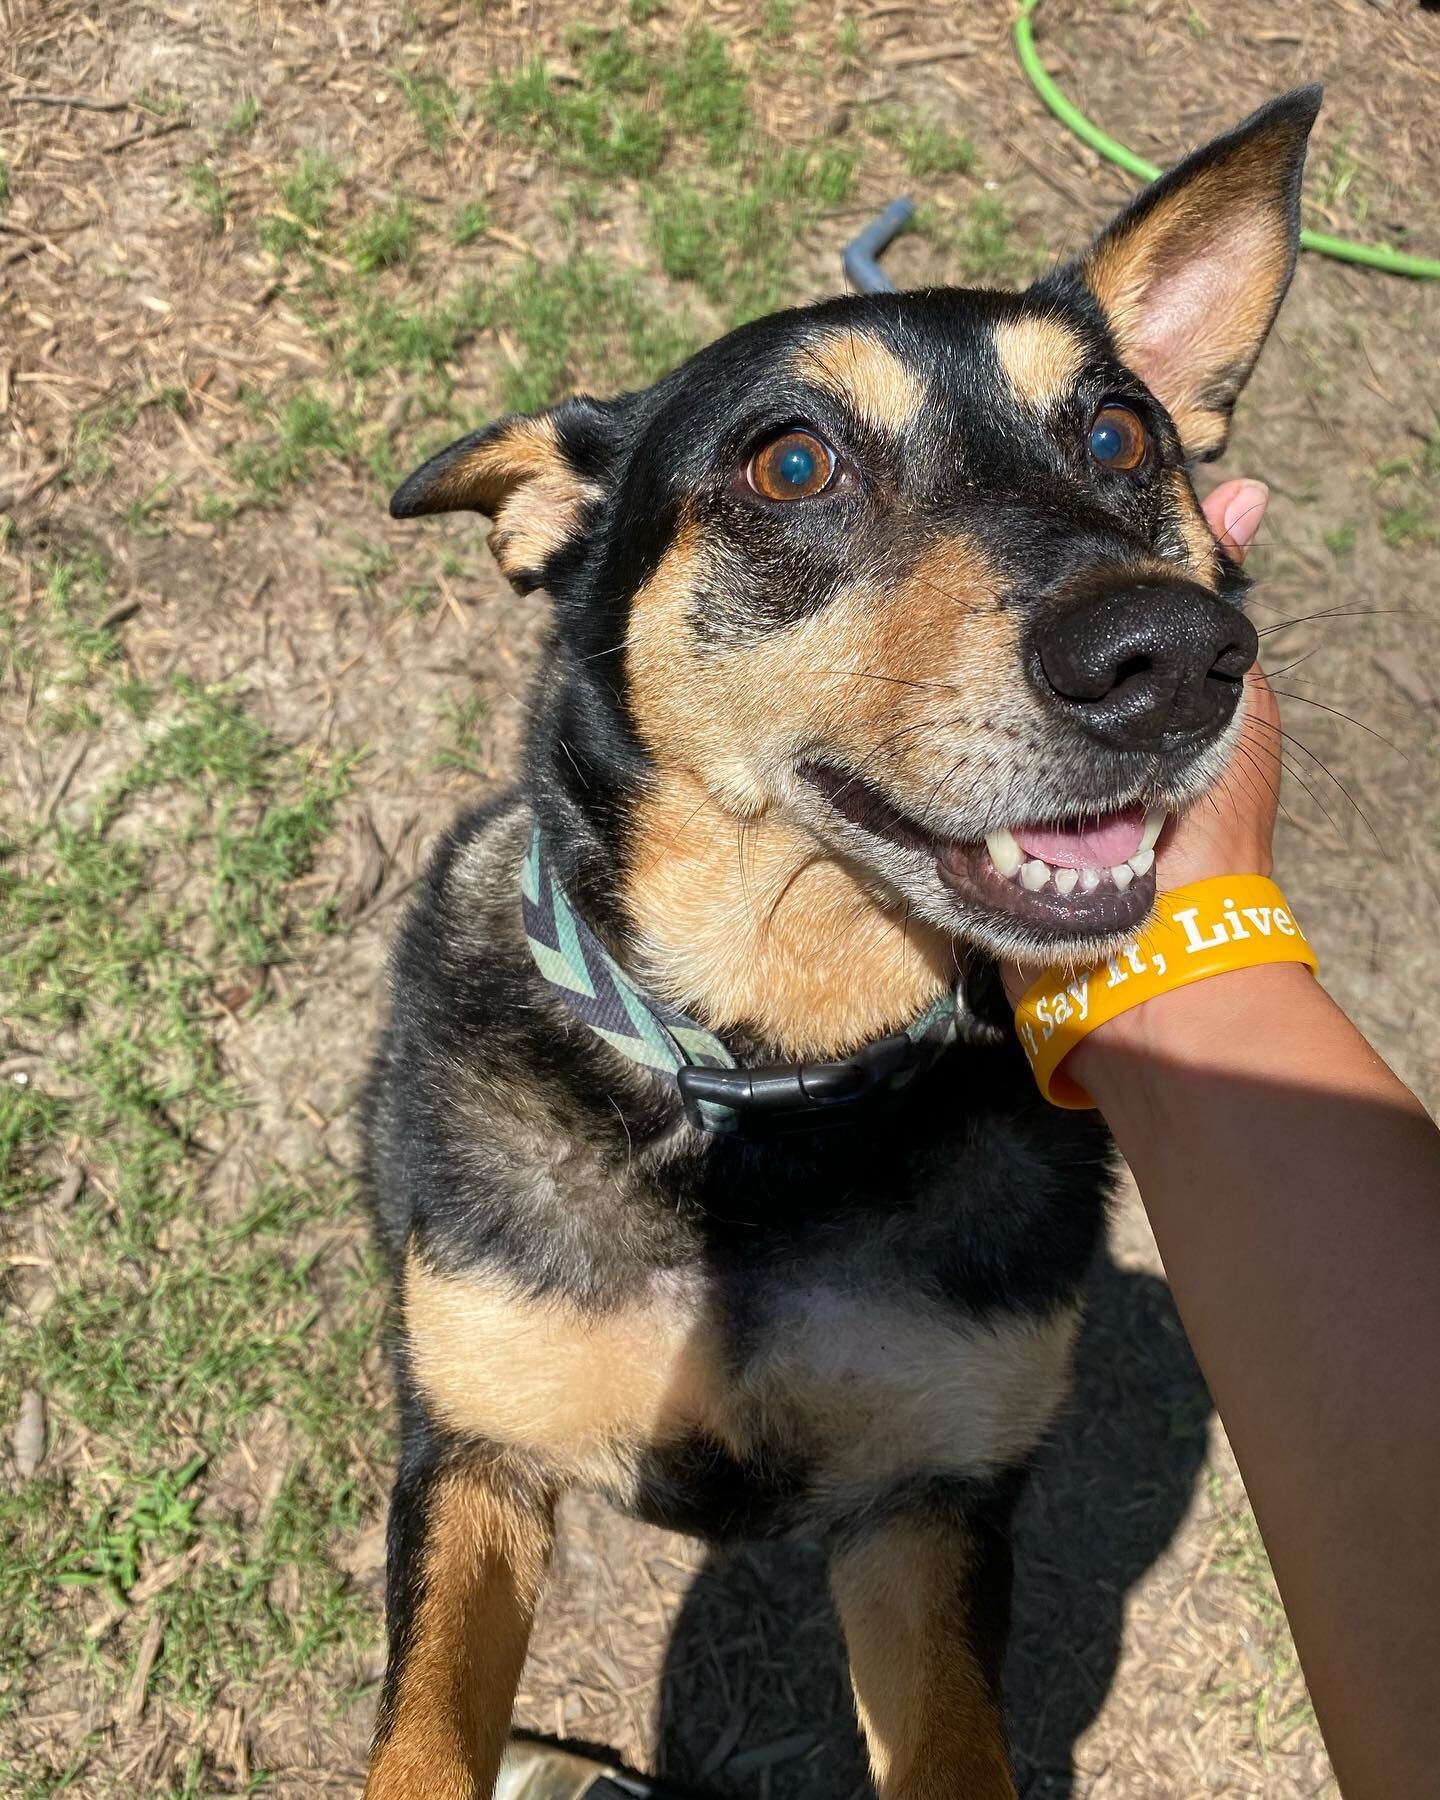 This smile is what we strive for! 😁

#Tailswaggers #Tailwagswag #fortworthdogs #Tailswaggersdaycare #Fortworthdoggiedaycare #Fortworthdogwalks